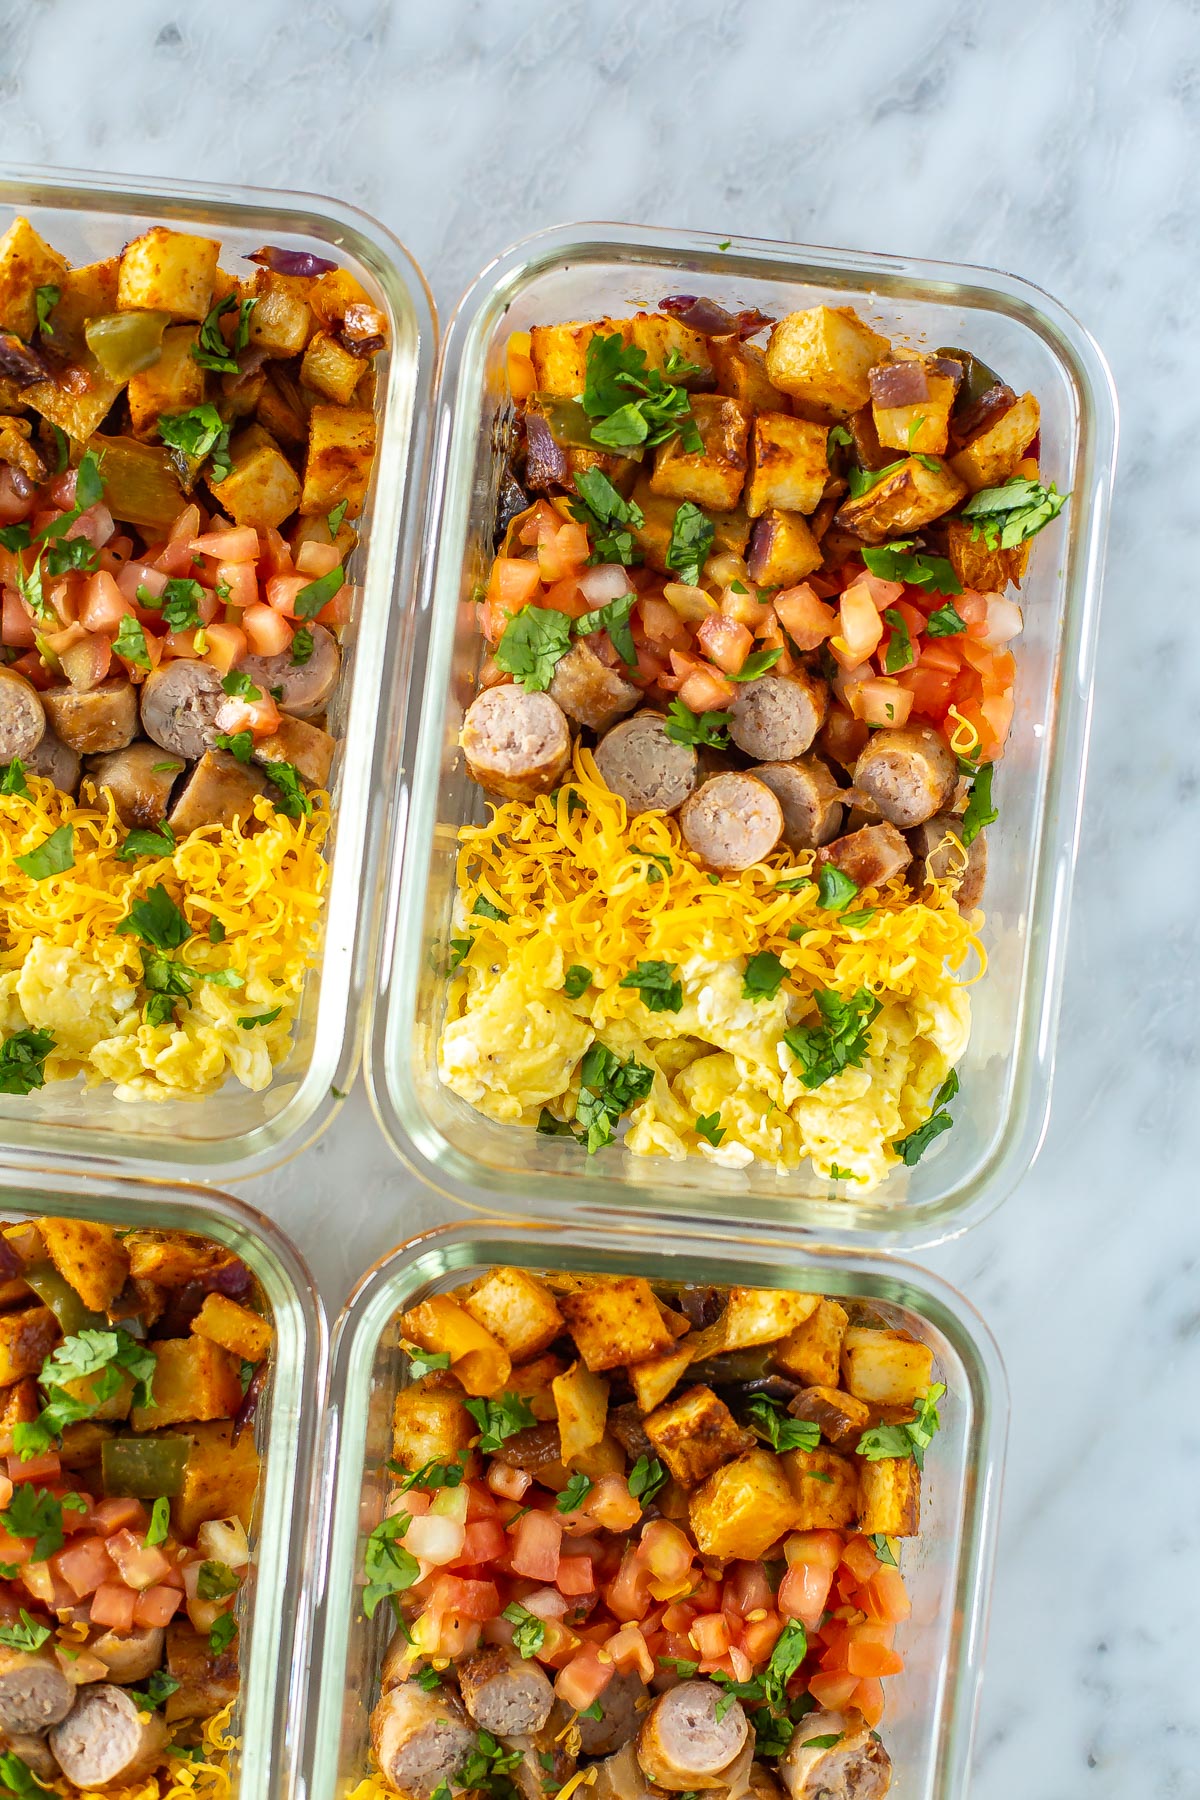 Four meal prep containers filled with roasted veggies, scrambled eggs, and cooked sausage.